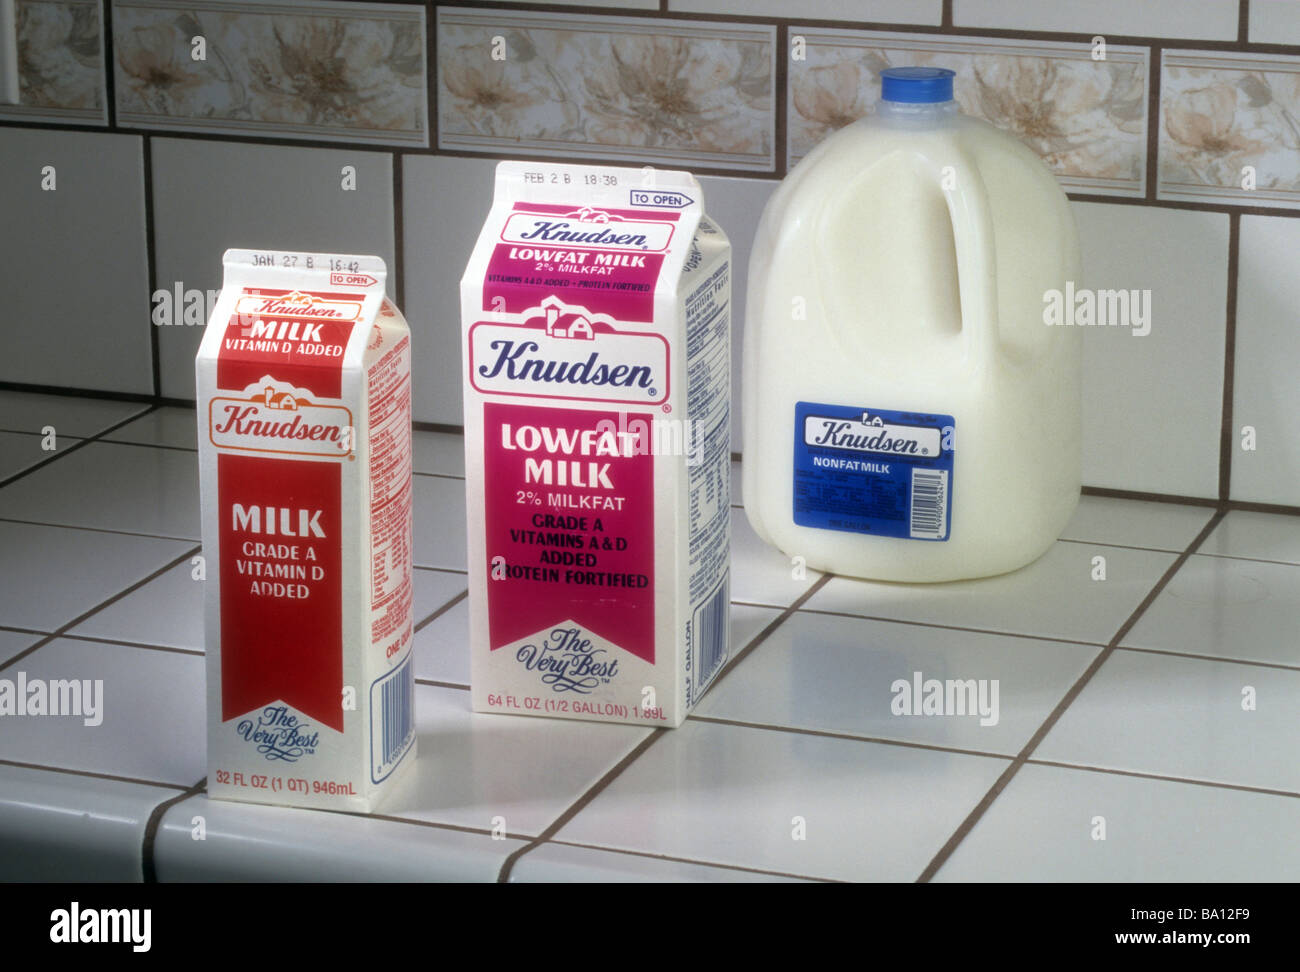 Milk non-fat 1% 2% whole homogenized drink beverage dairy vary size carton bottle plastic cardboard contain type food health Stock Photo